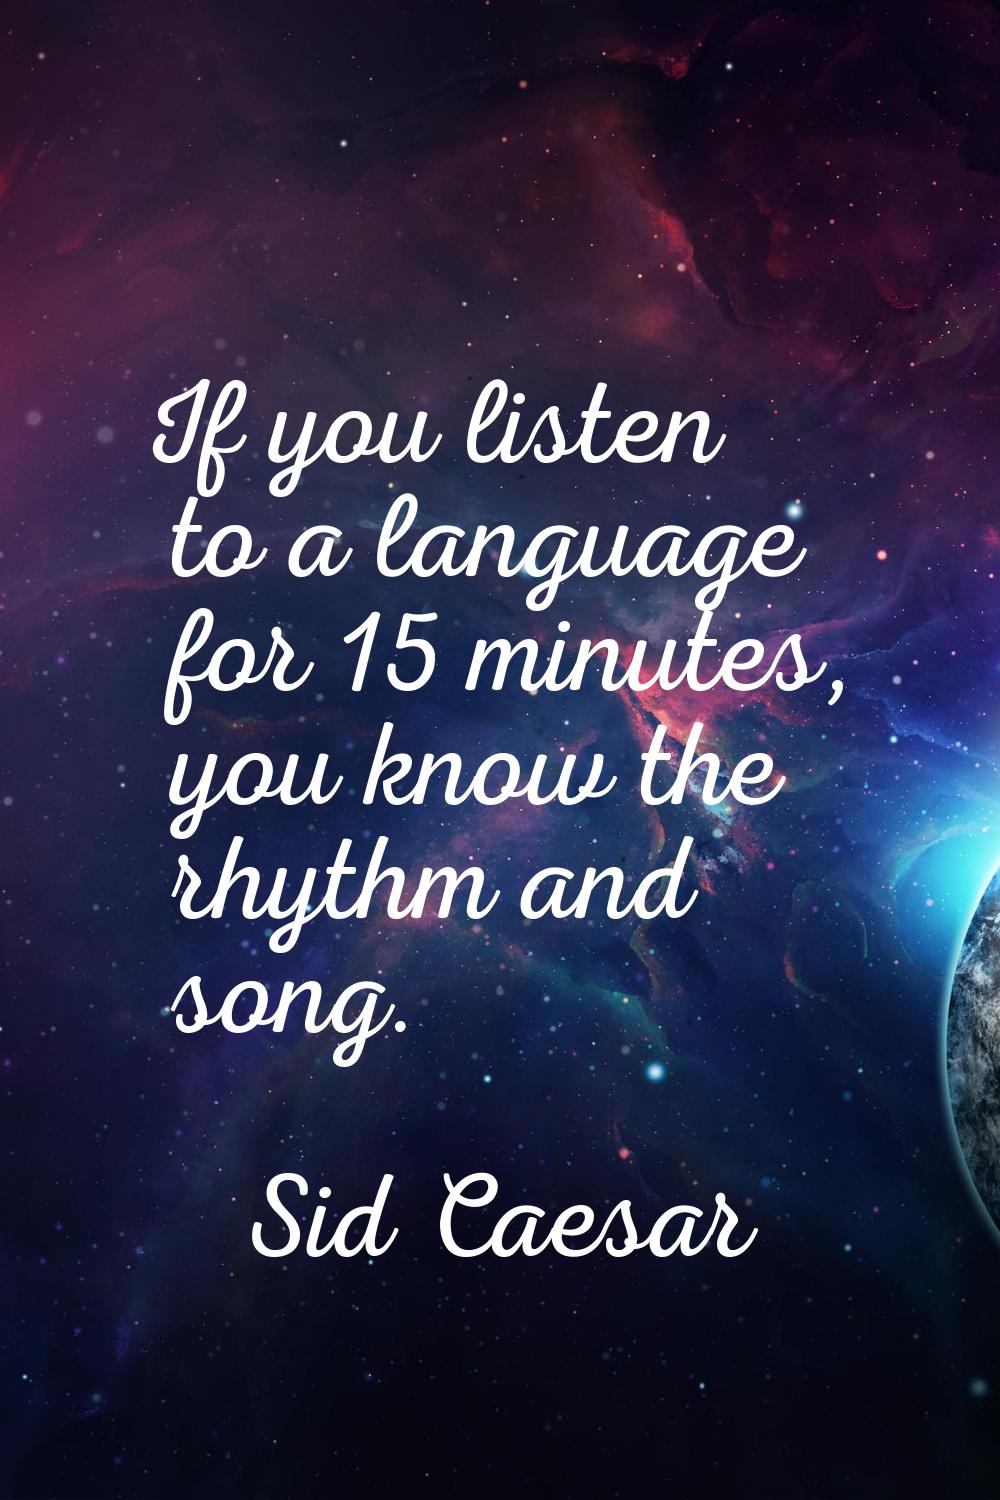 If you listen to a language for 15 minutes, you know the rhythm and song.